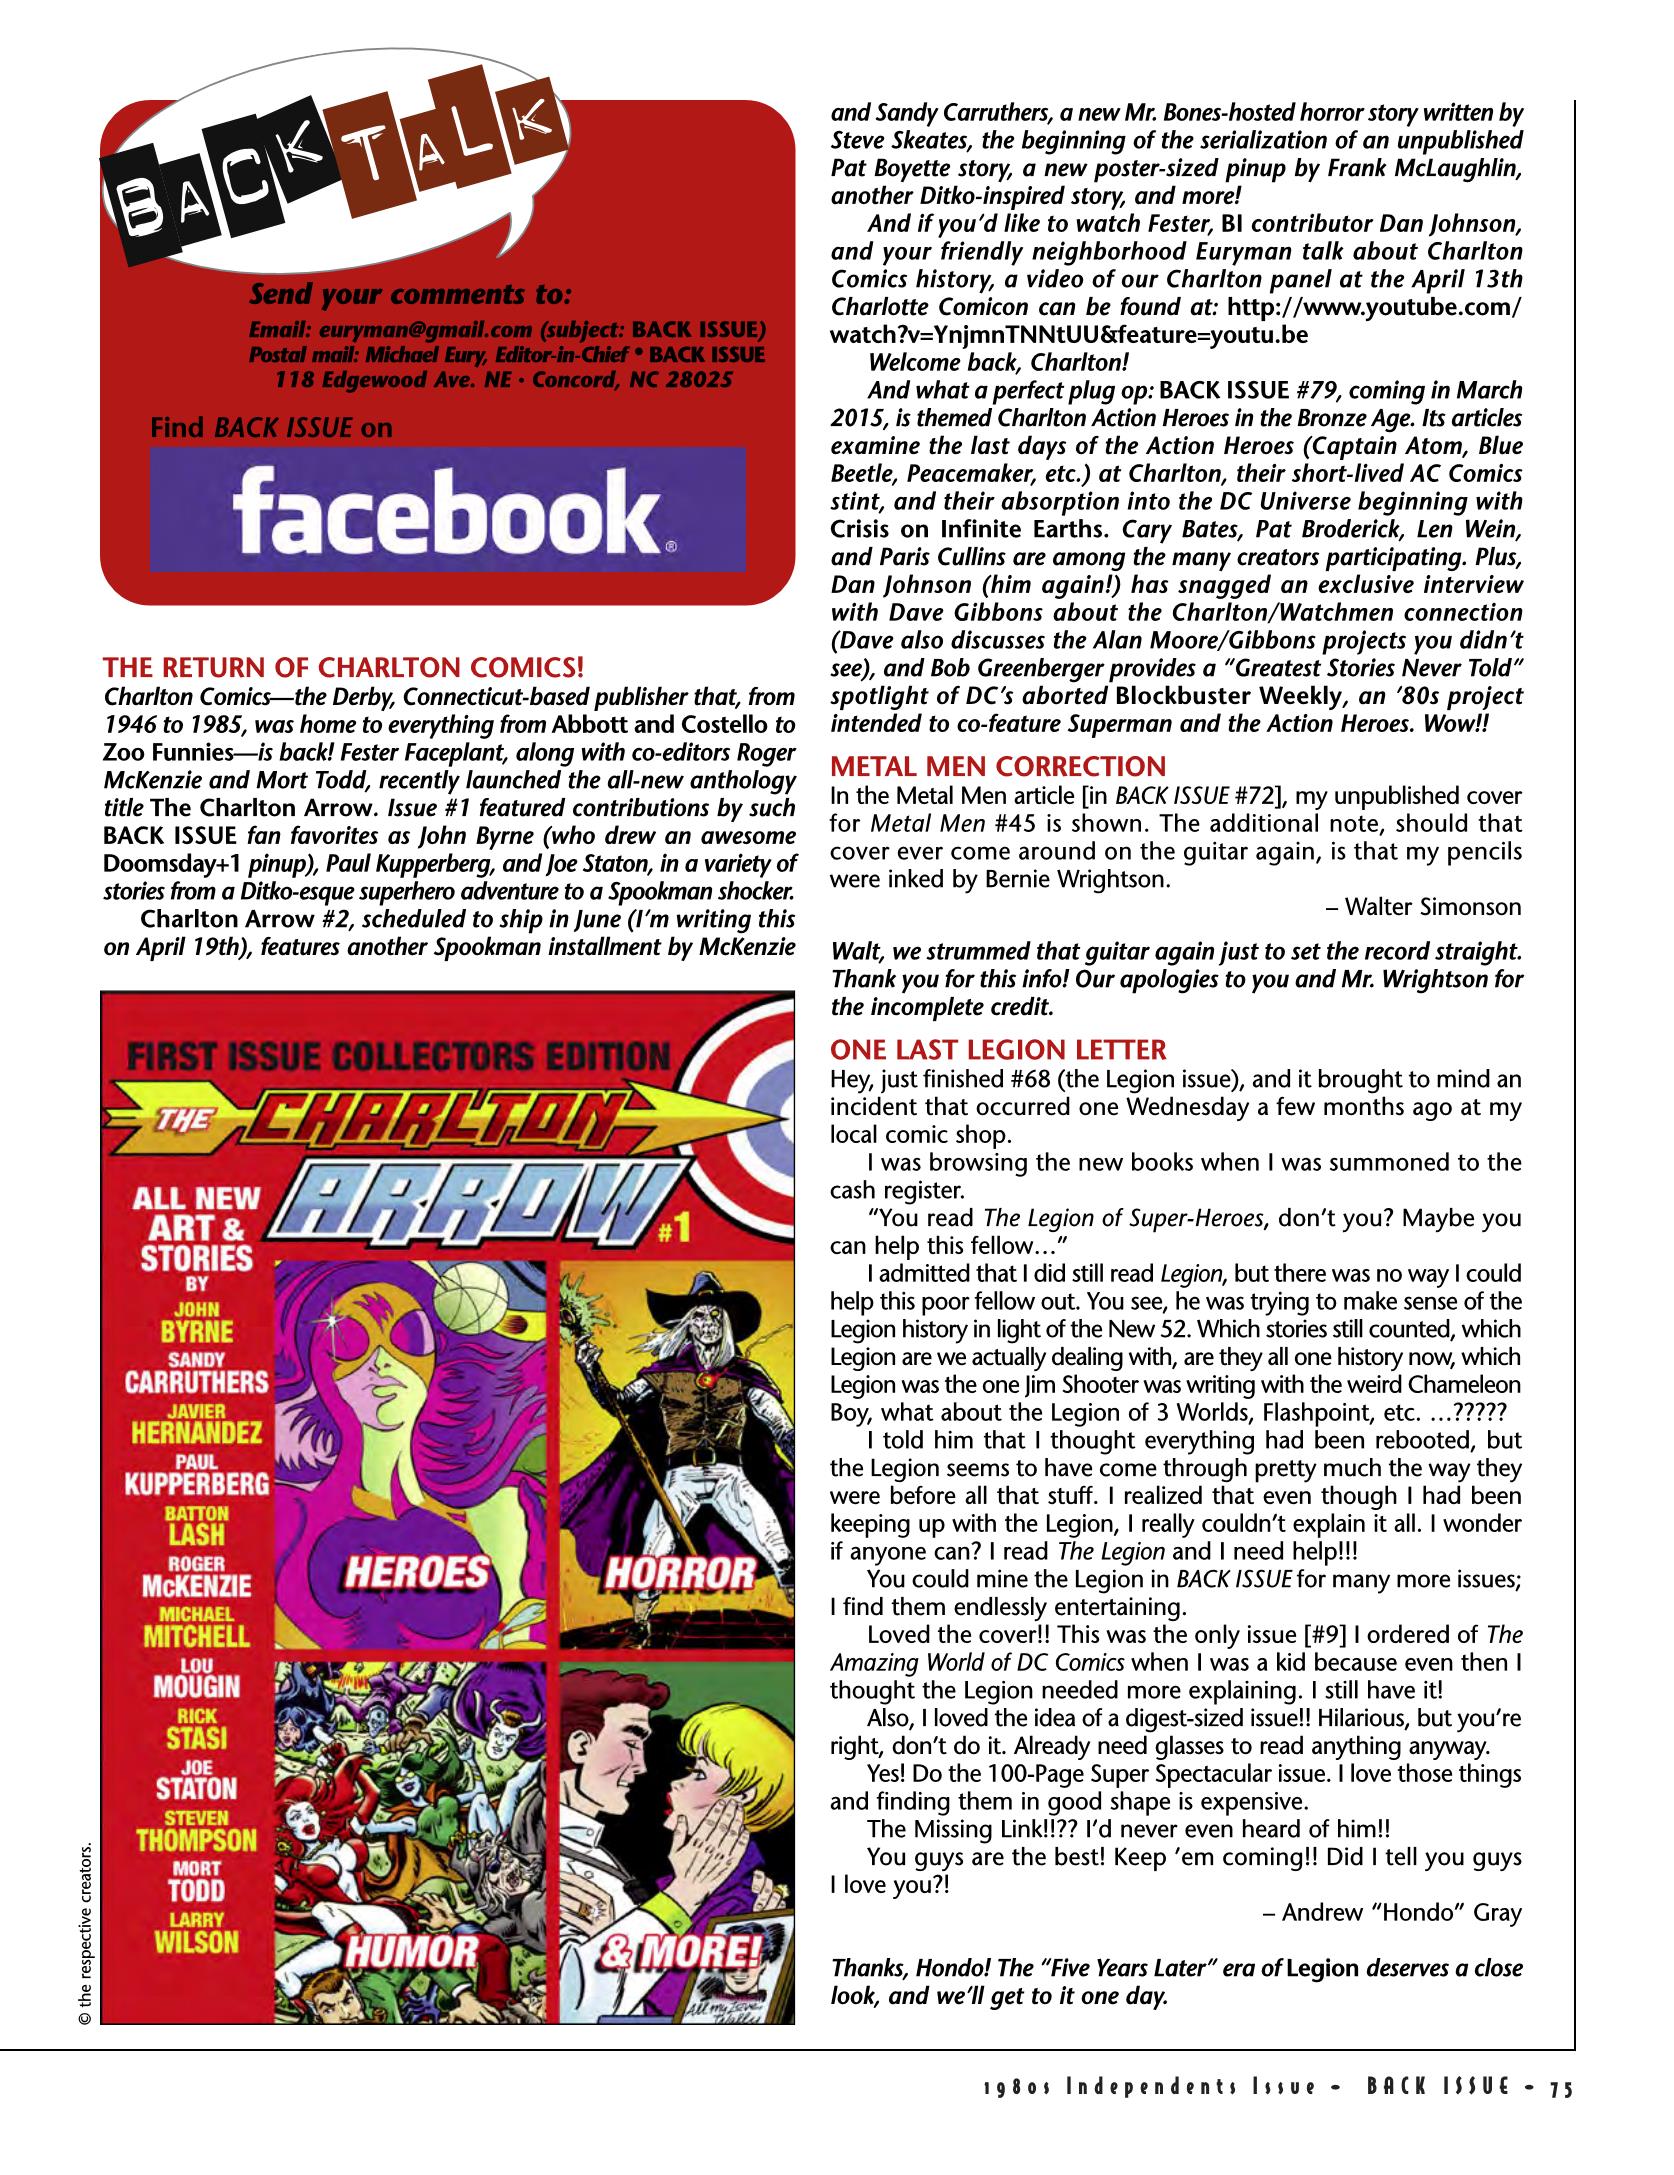 Read online Back Issue comic -  Issue #75 - 75